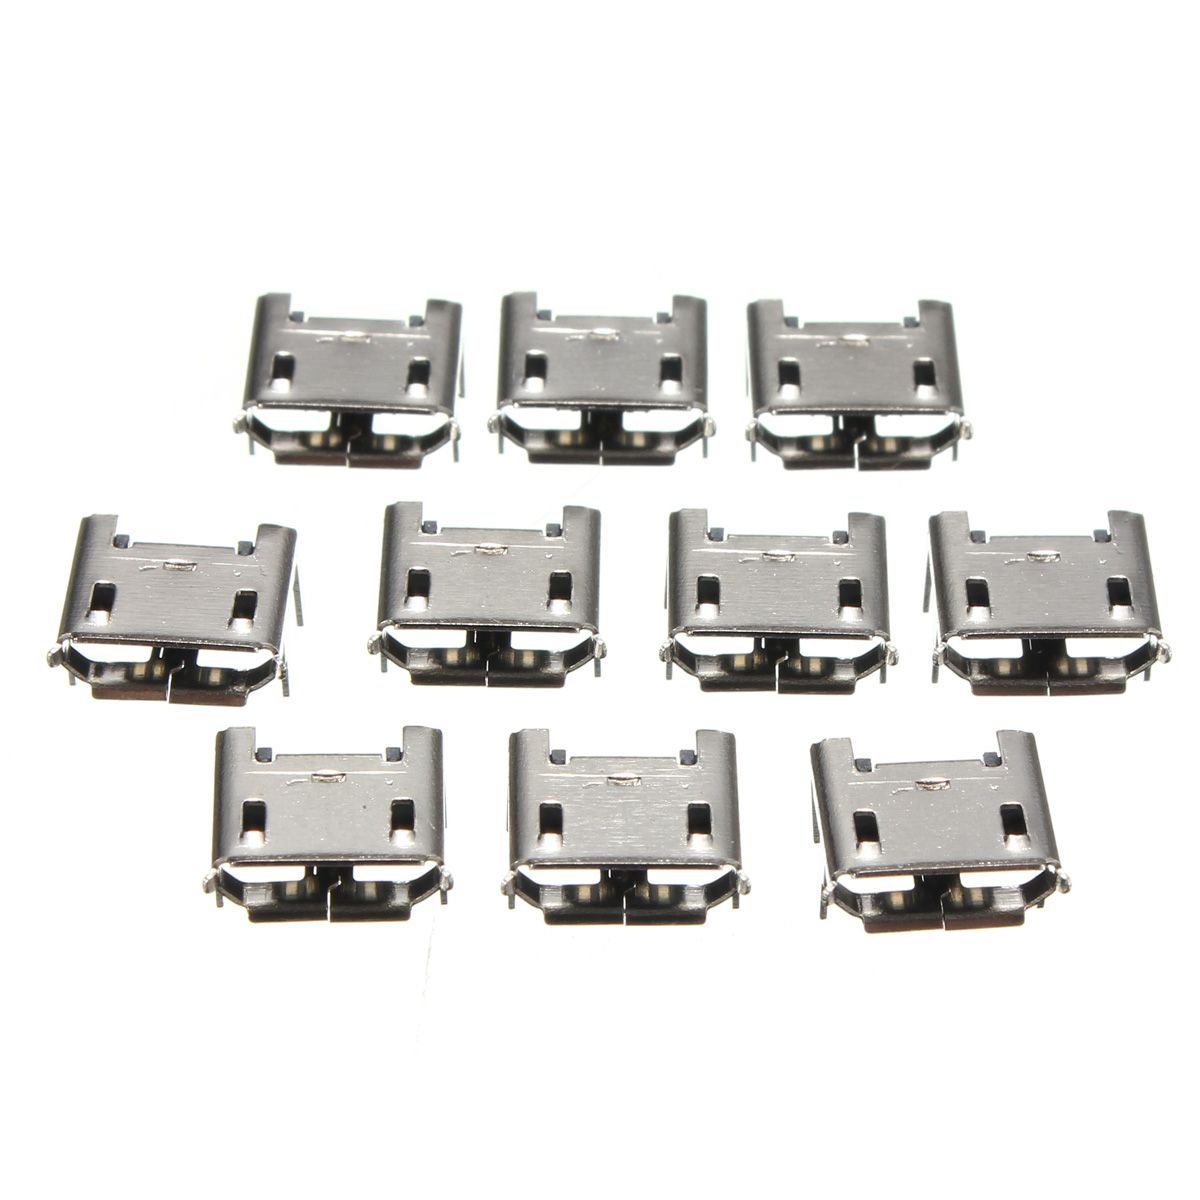 50pcs-Micro-USB-Type-B-5-Pin-Female-Socket-4-Vertical-Legs-For-Solder-Connector-1370525